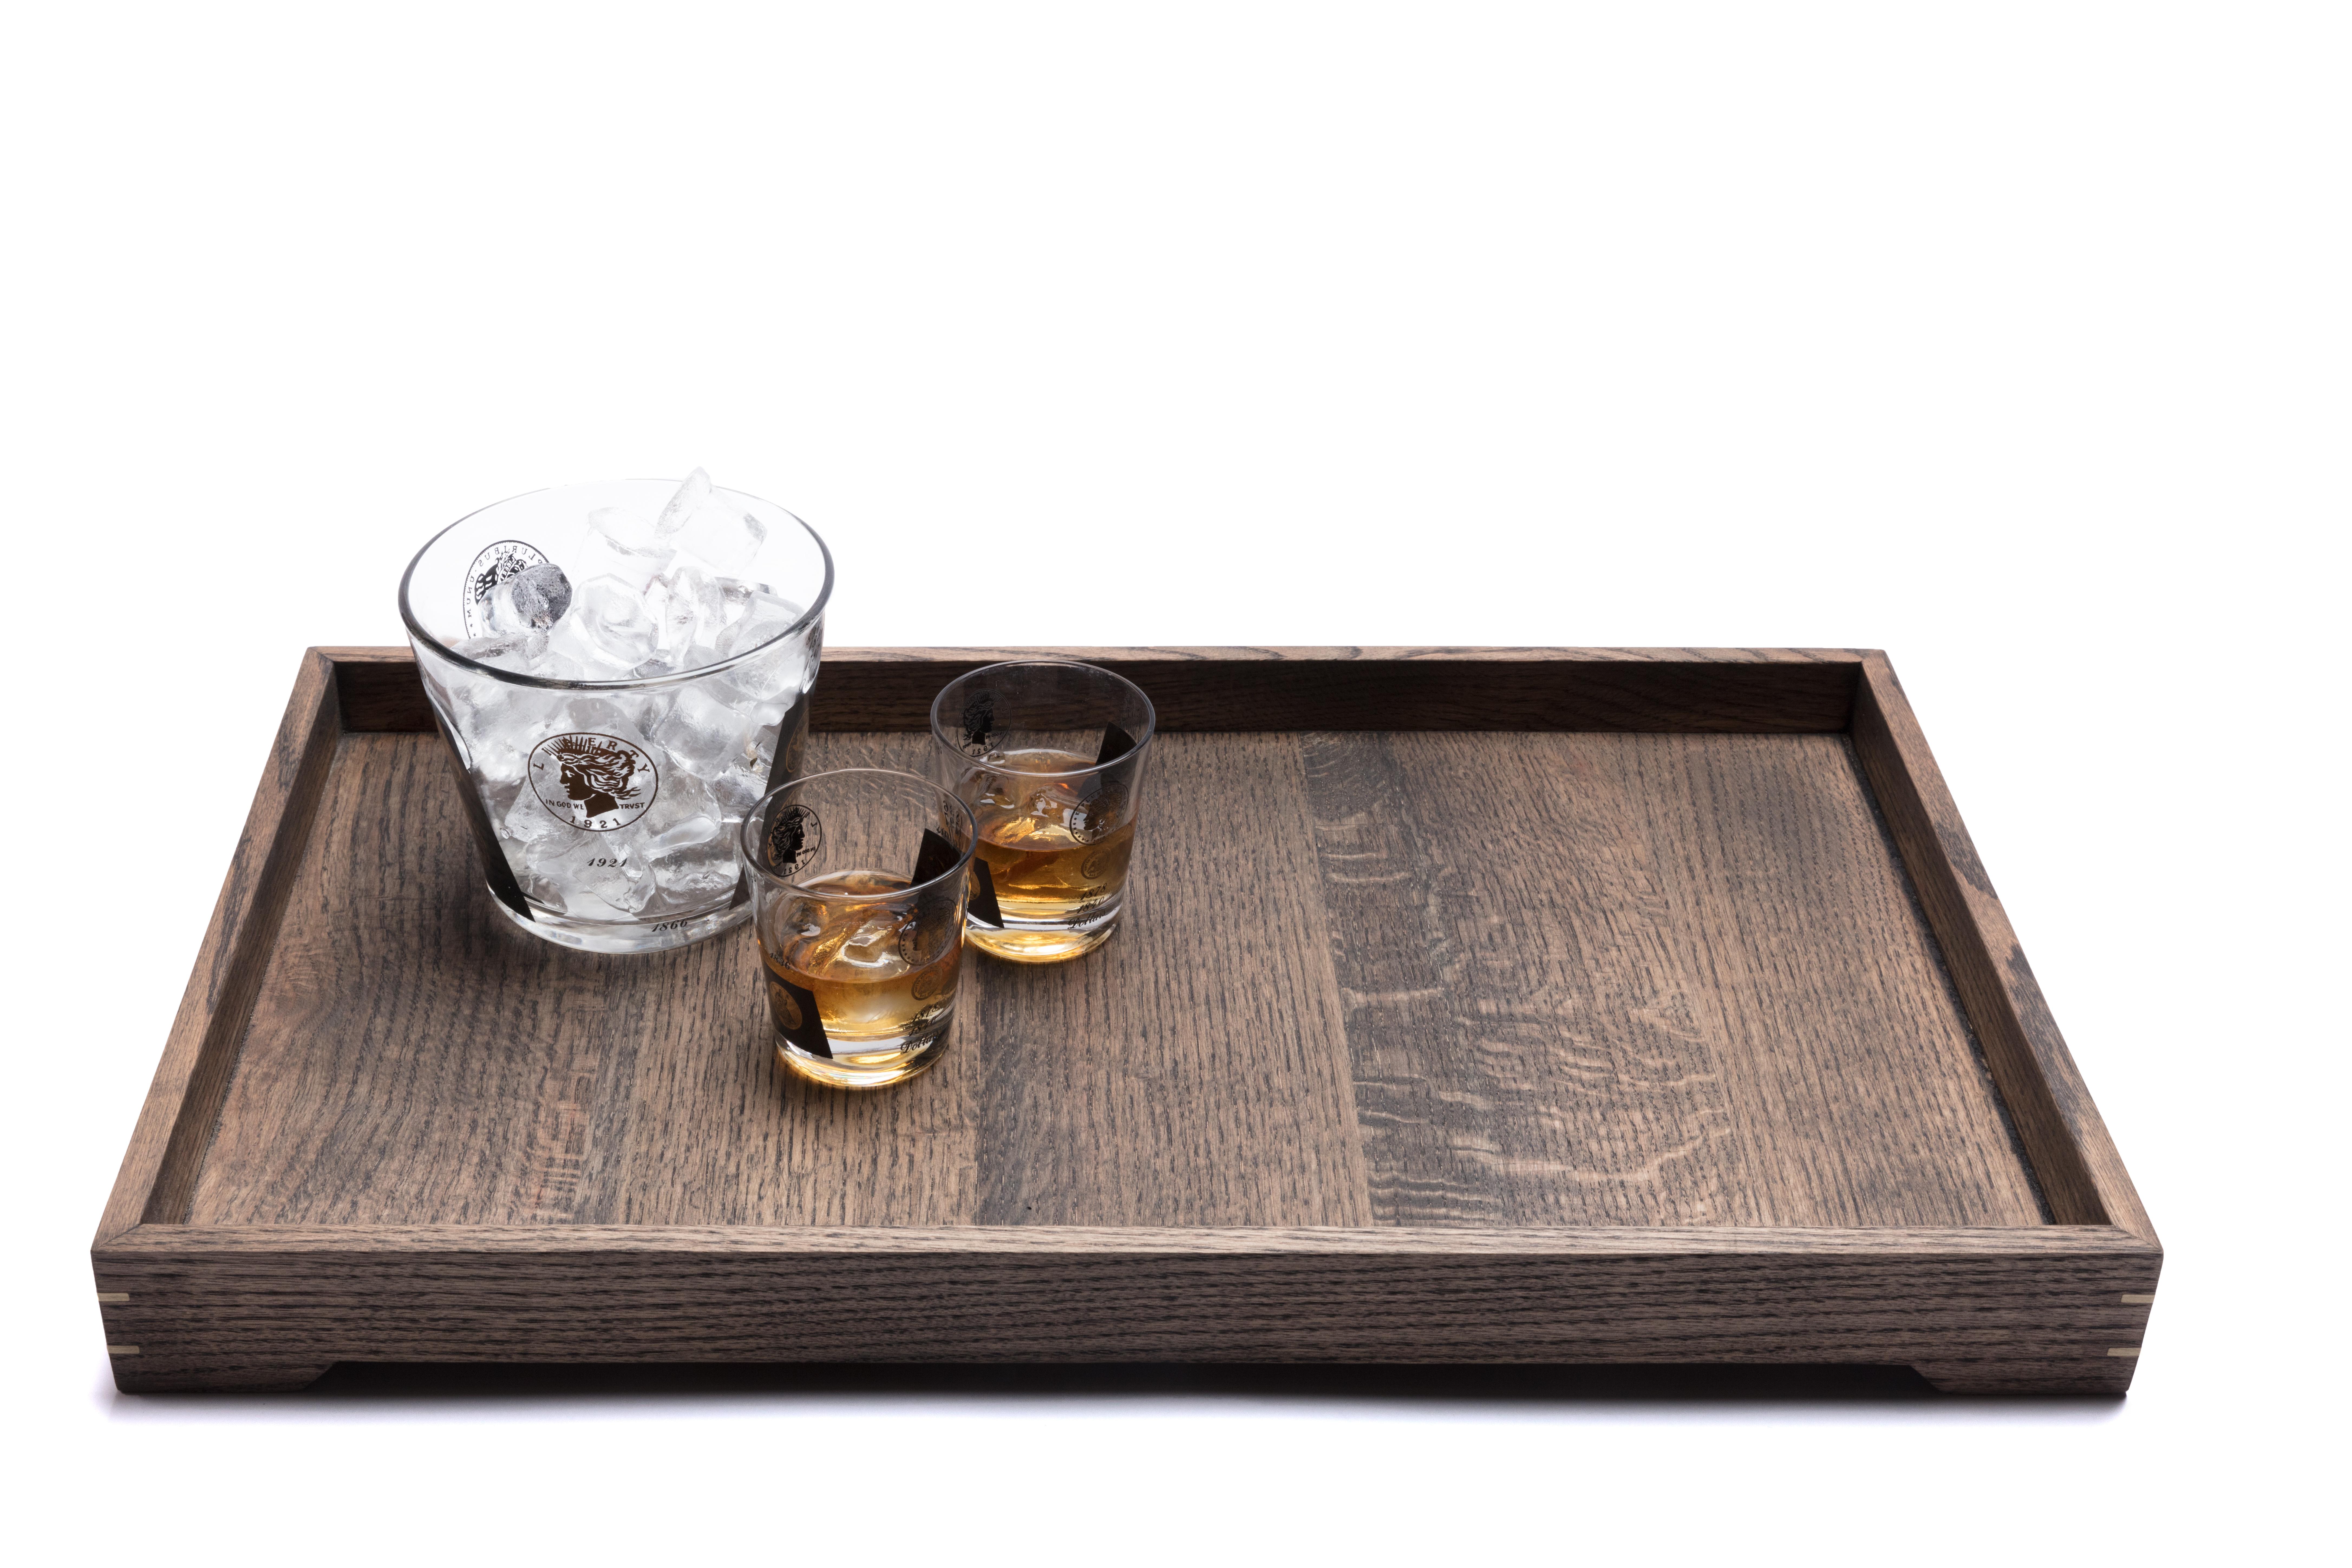 Organic Modern Solid Ebonized Oak Wood and Brass Tray for Barware or Ottoman Display or Jewelry For Sale